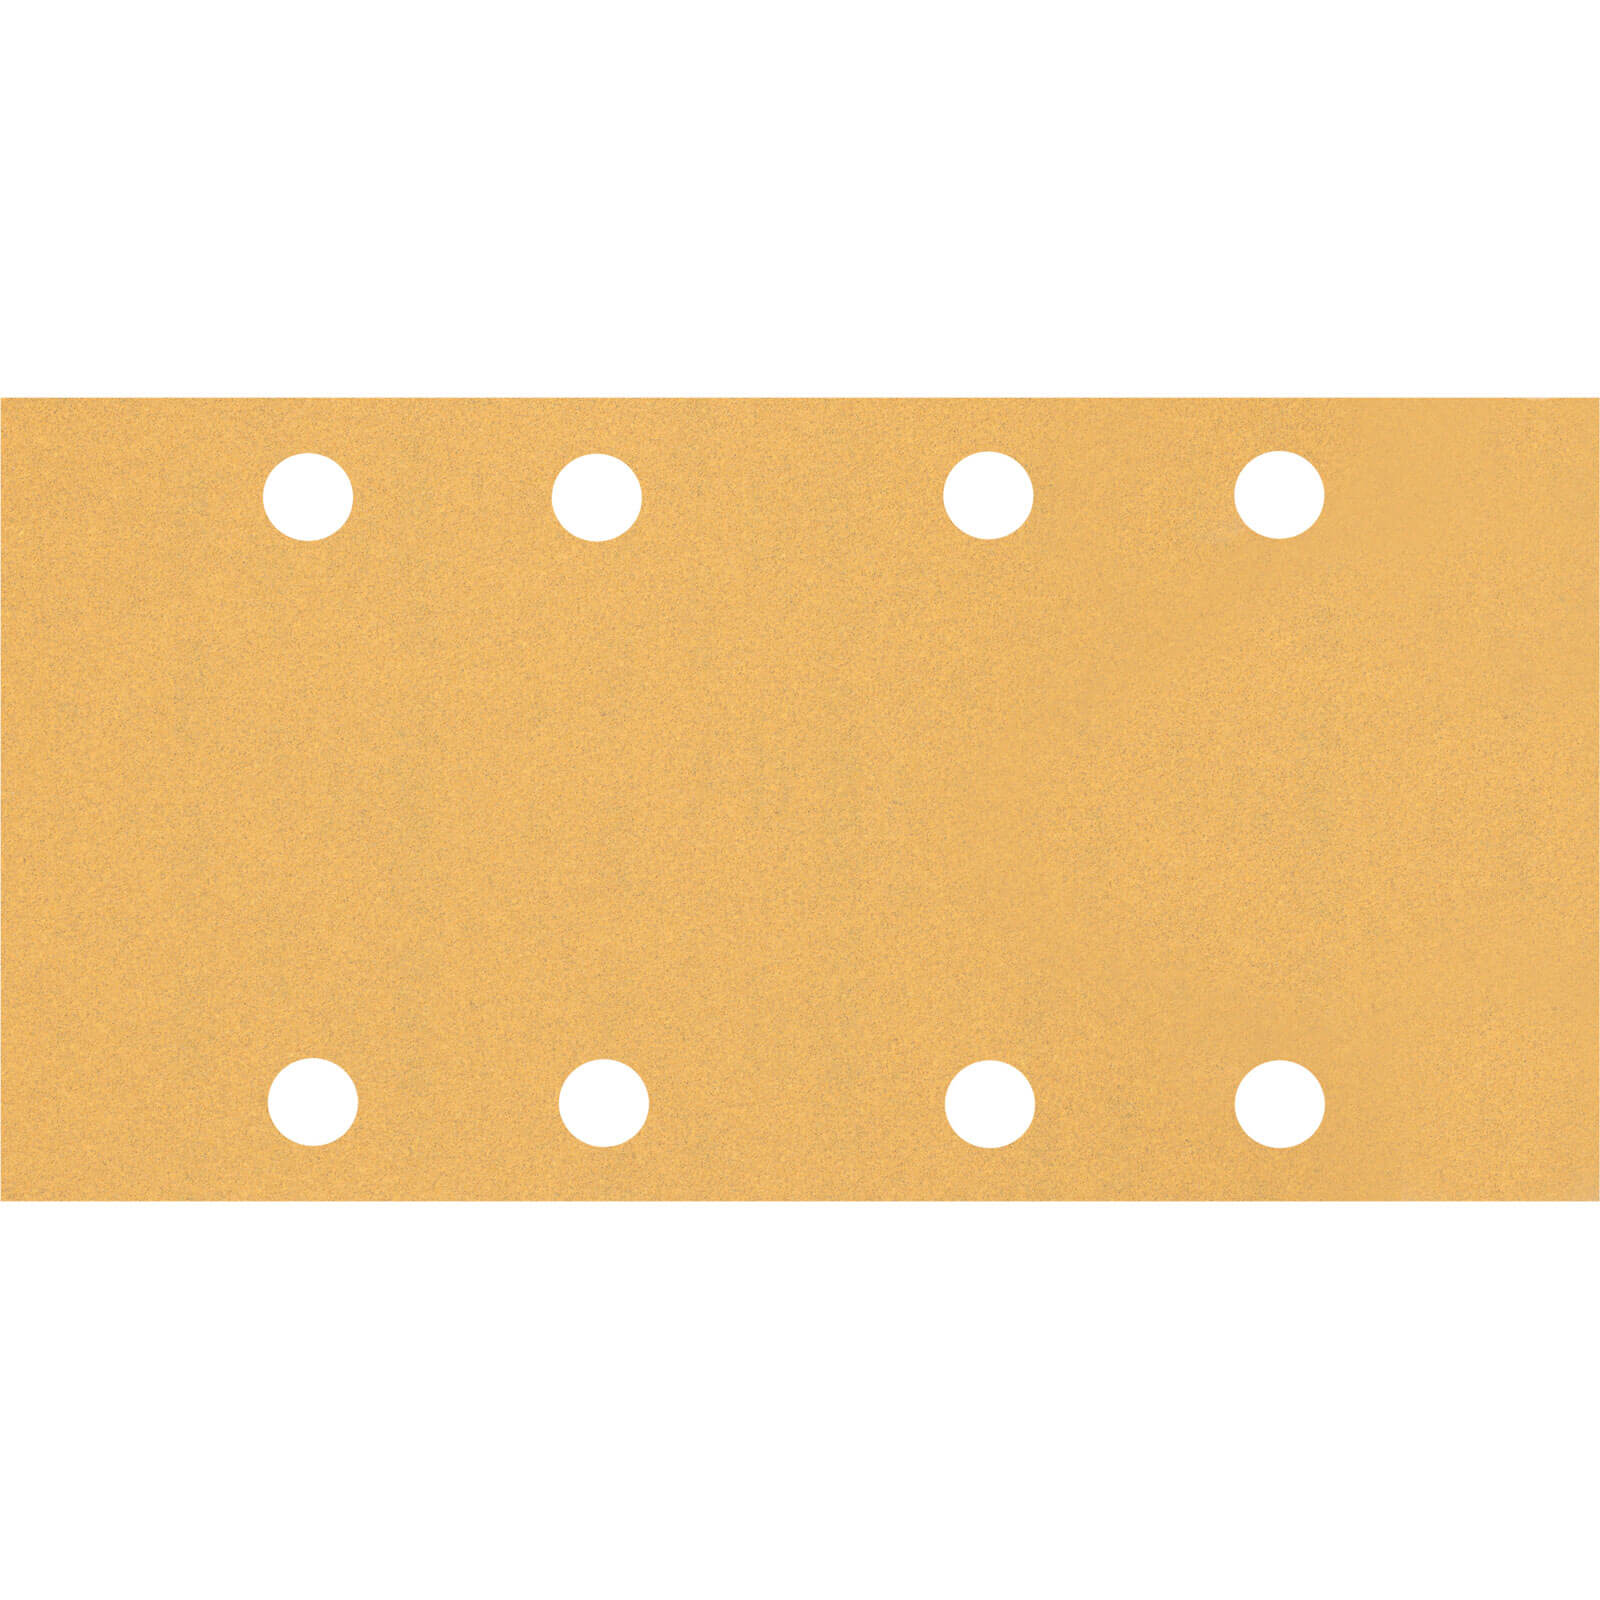 Image of Bosch Expert C470 Punched Hook and Loop Sanding Sheets 93mm x 186mm 120g Pack of 10